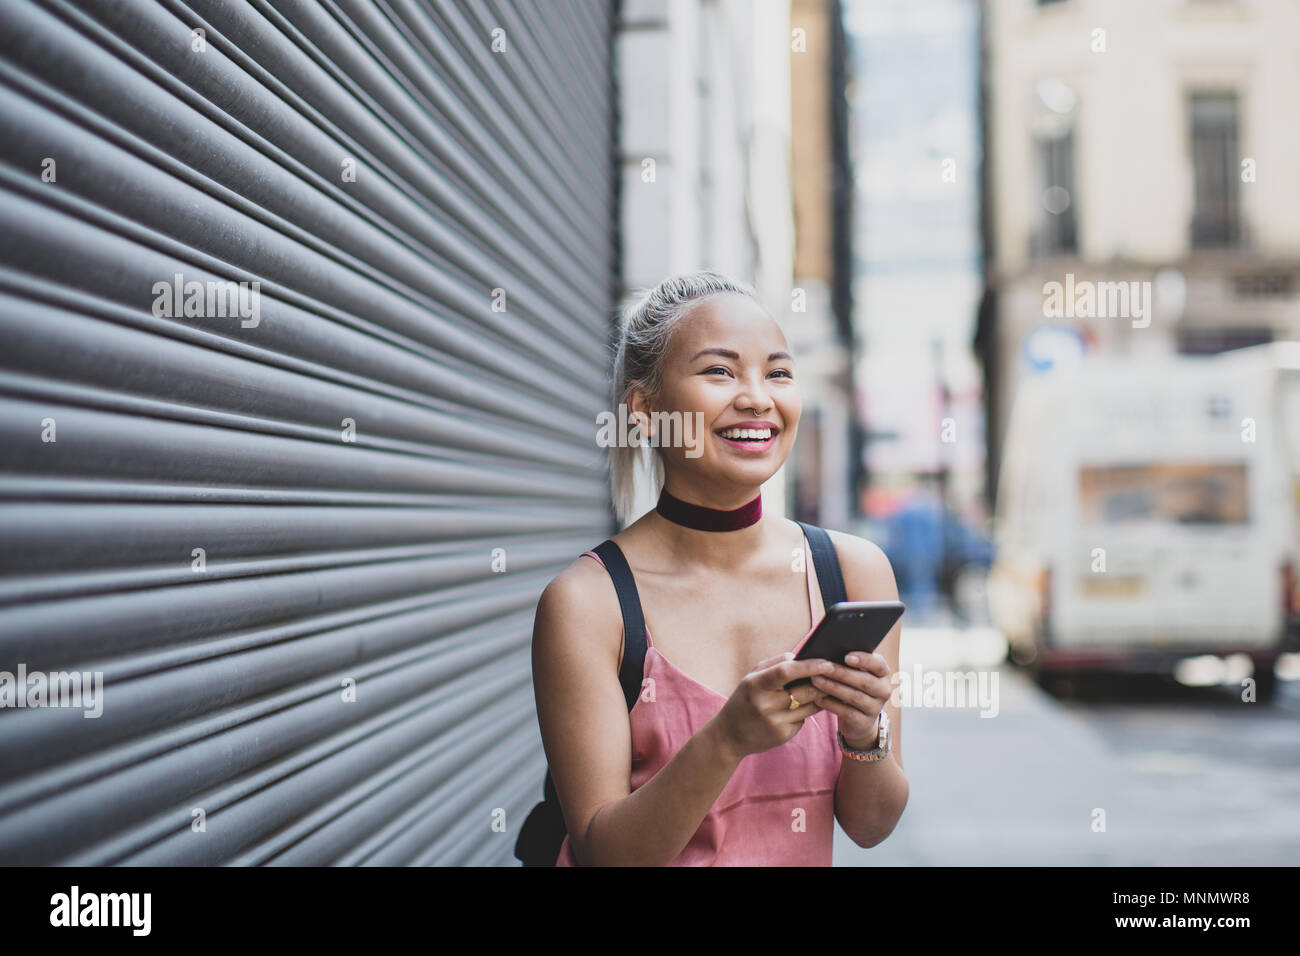 Young adult female messaging on smarphone Stock Photo